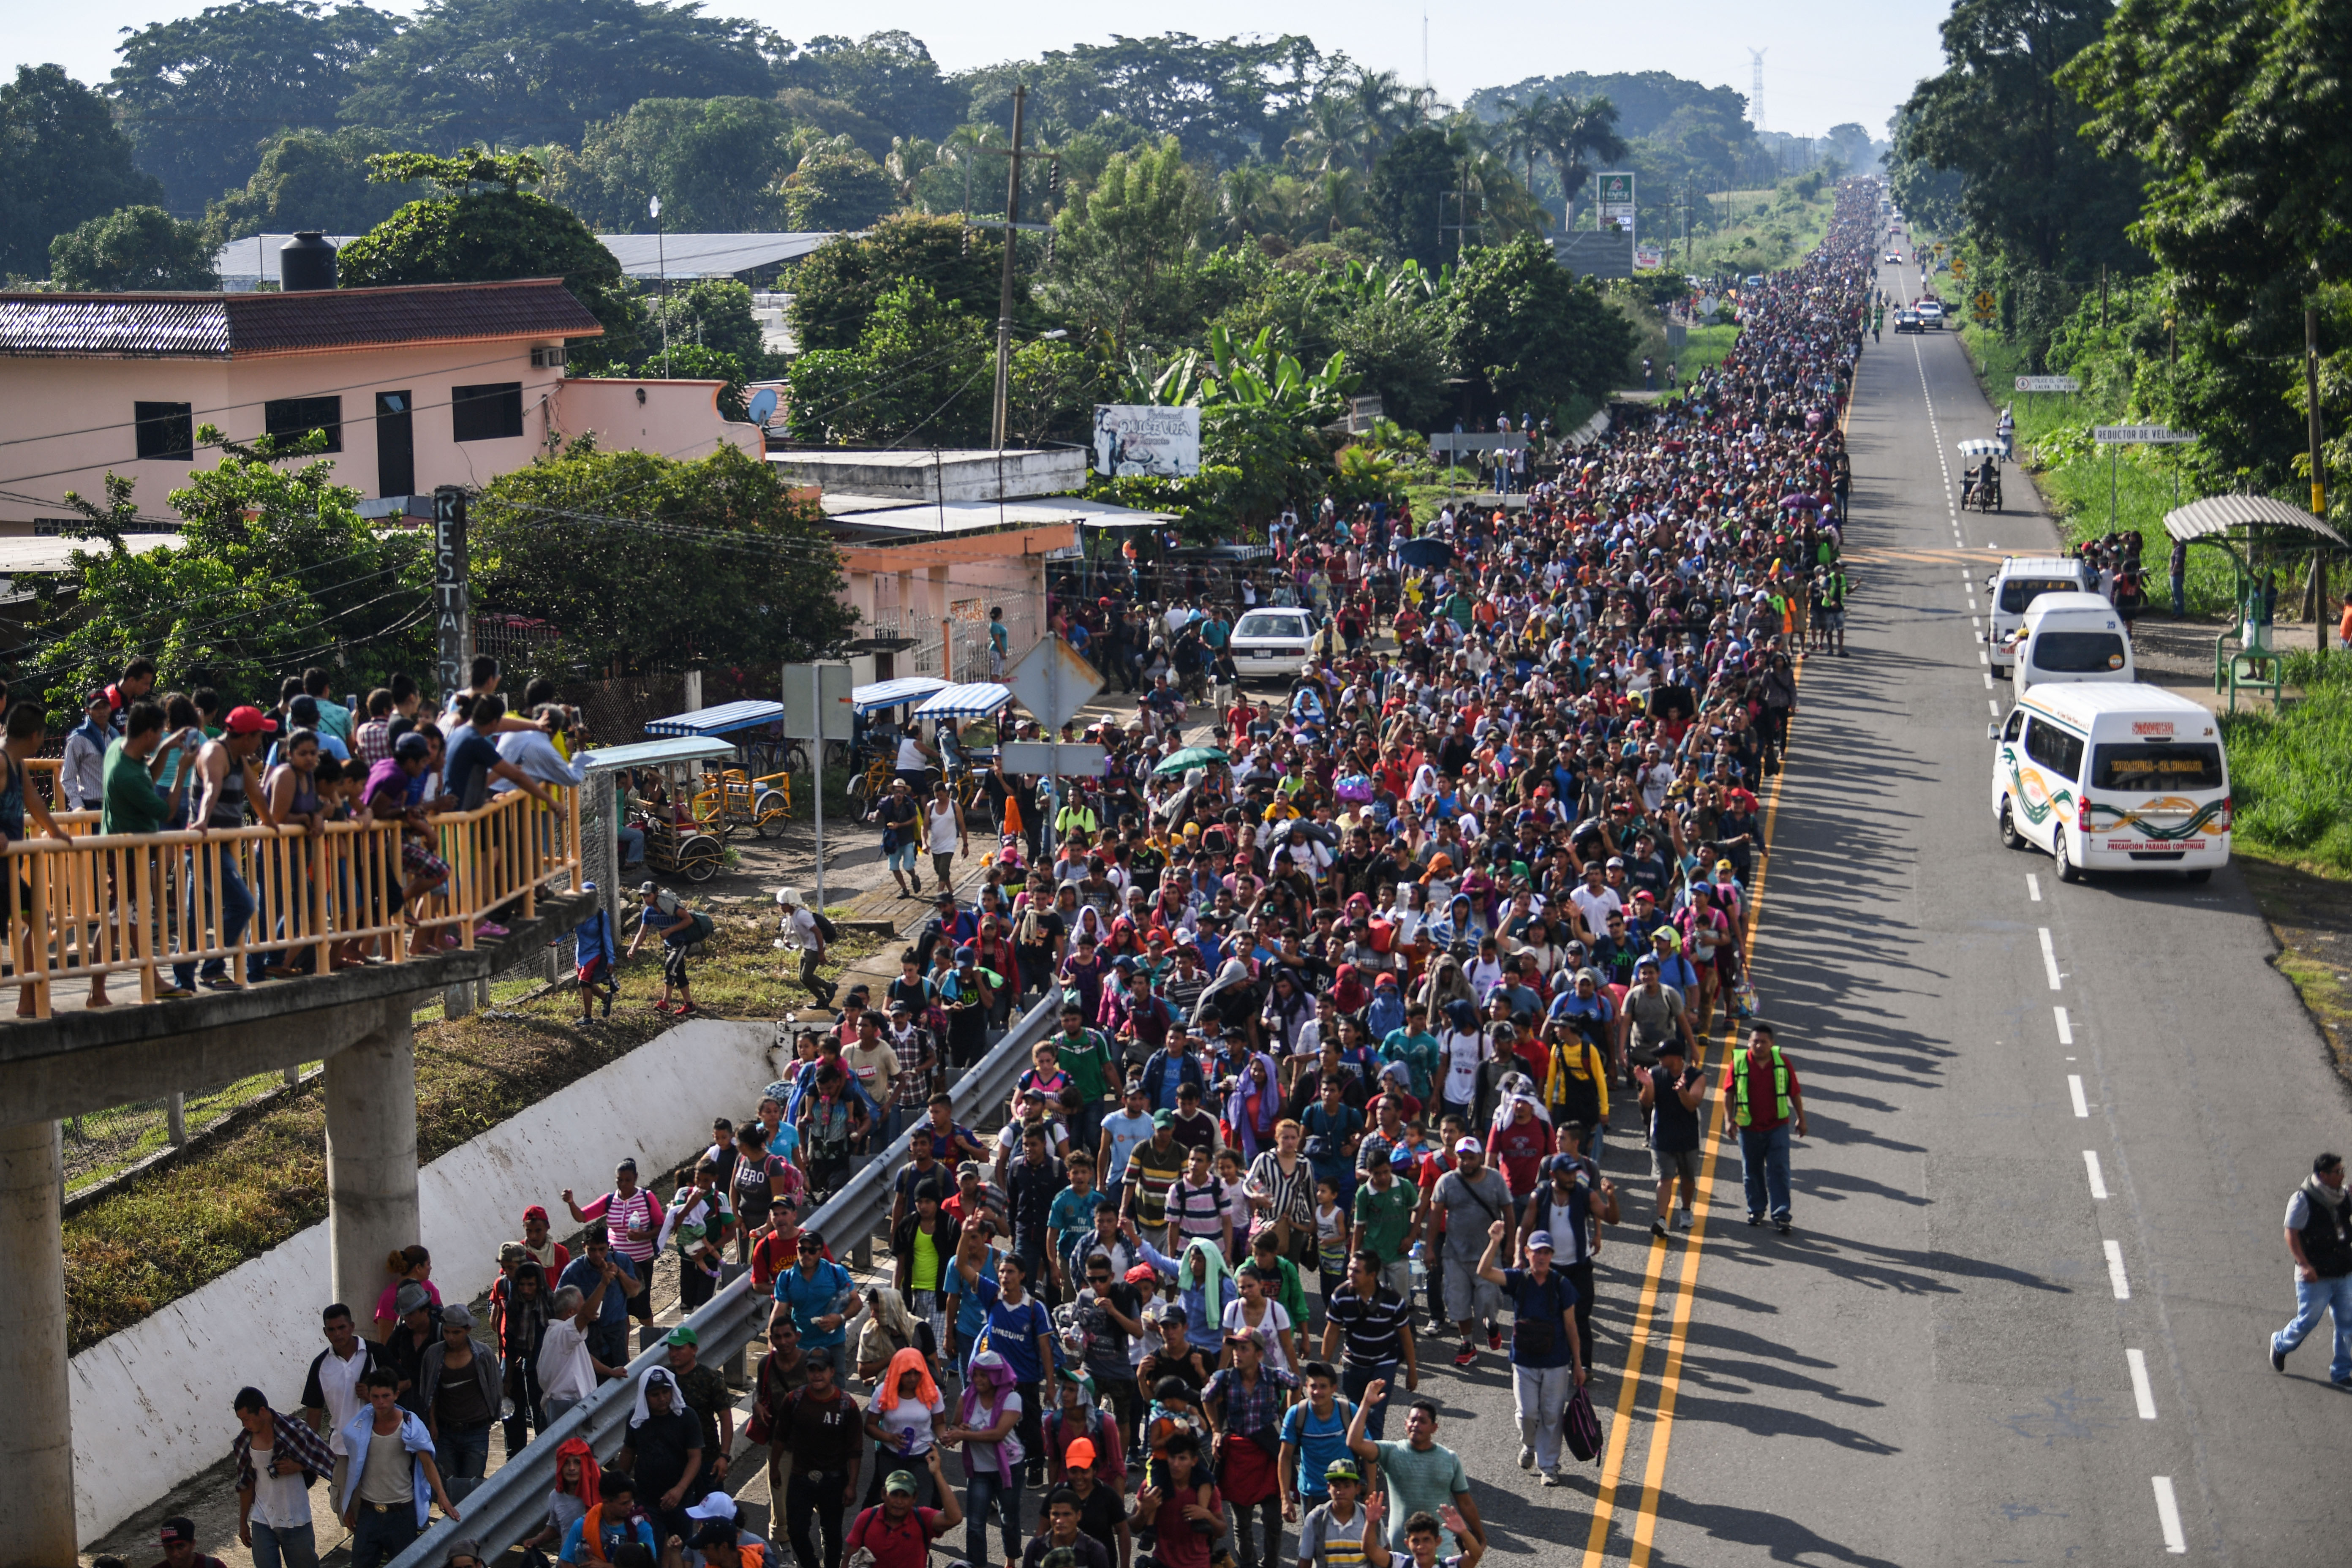 New Images Show Exactly How Massive The Migrant Caravan Is Traveling to